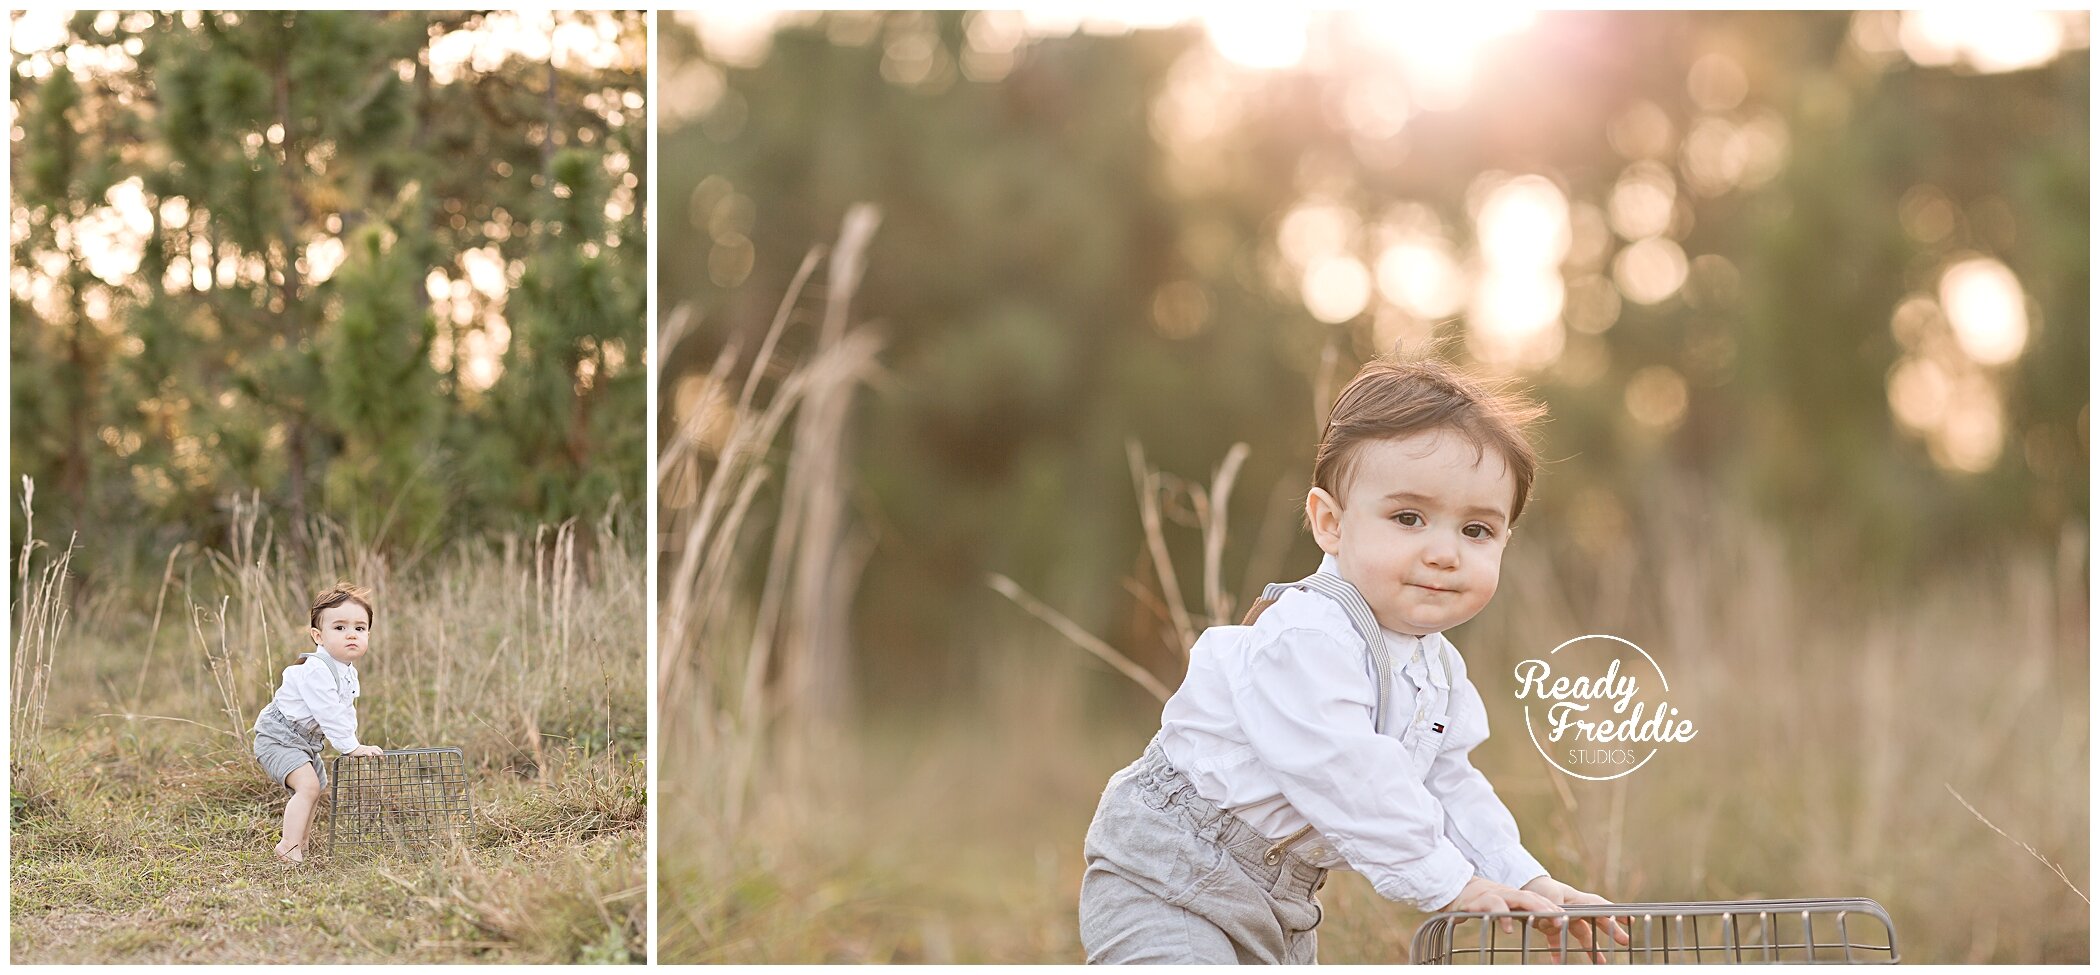 One Year Old Birthday Pictures at the field during sundown with Ivanna Vidal Photography